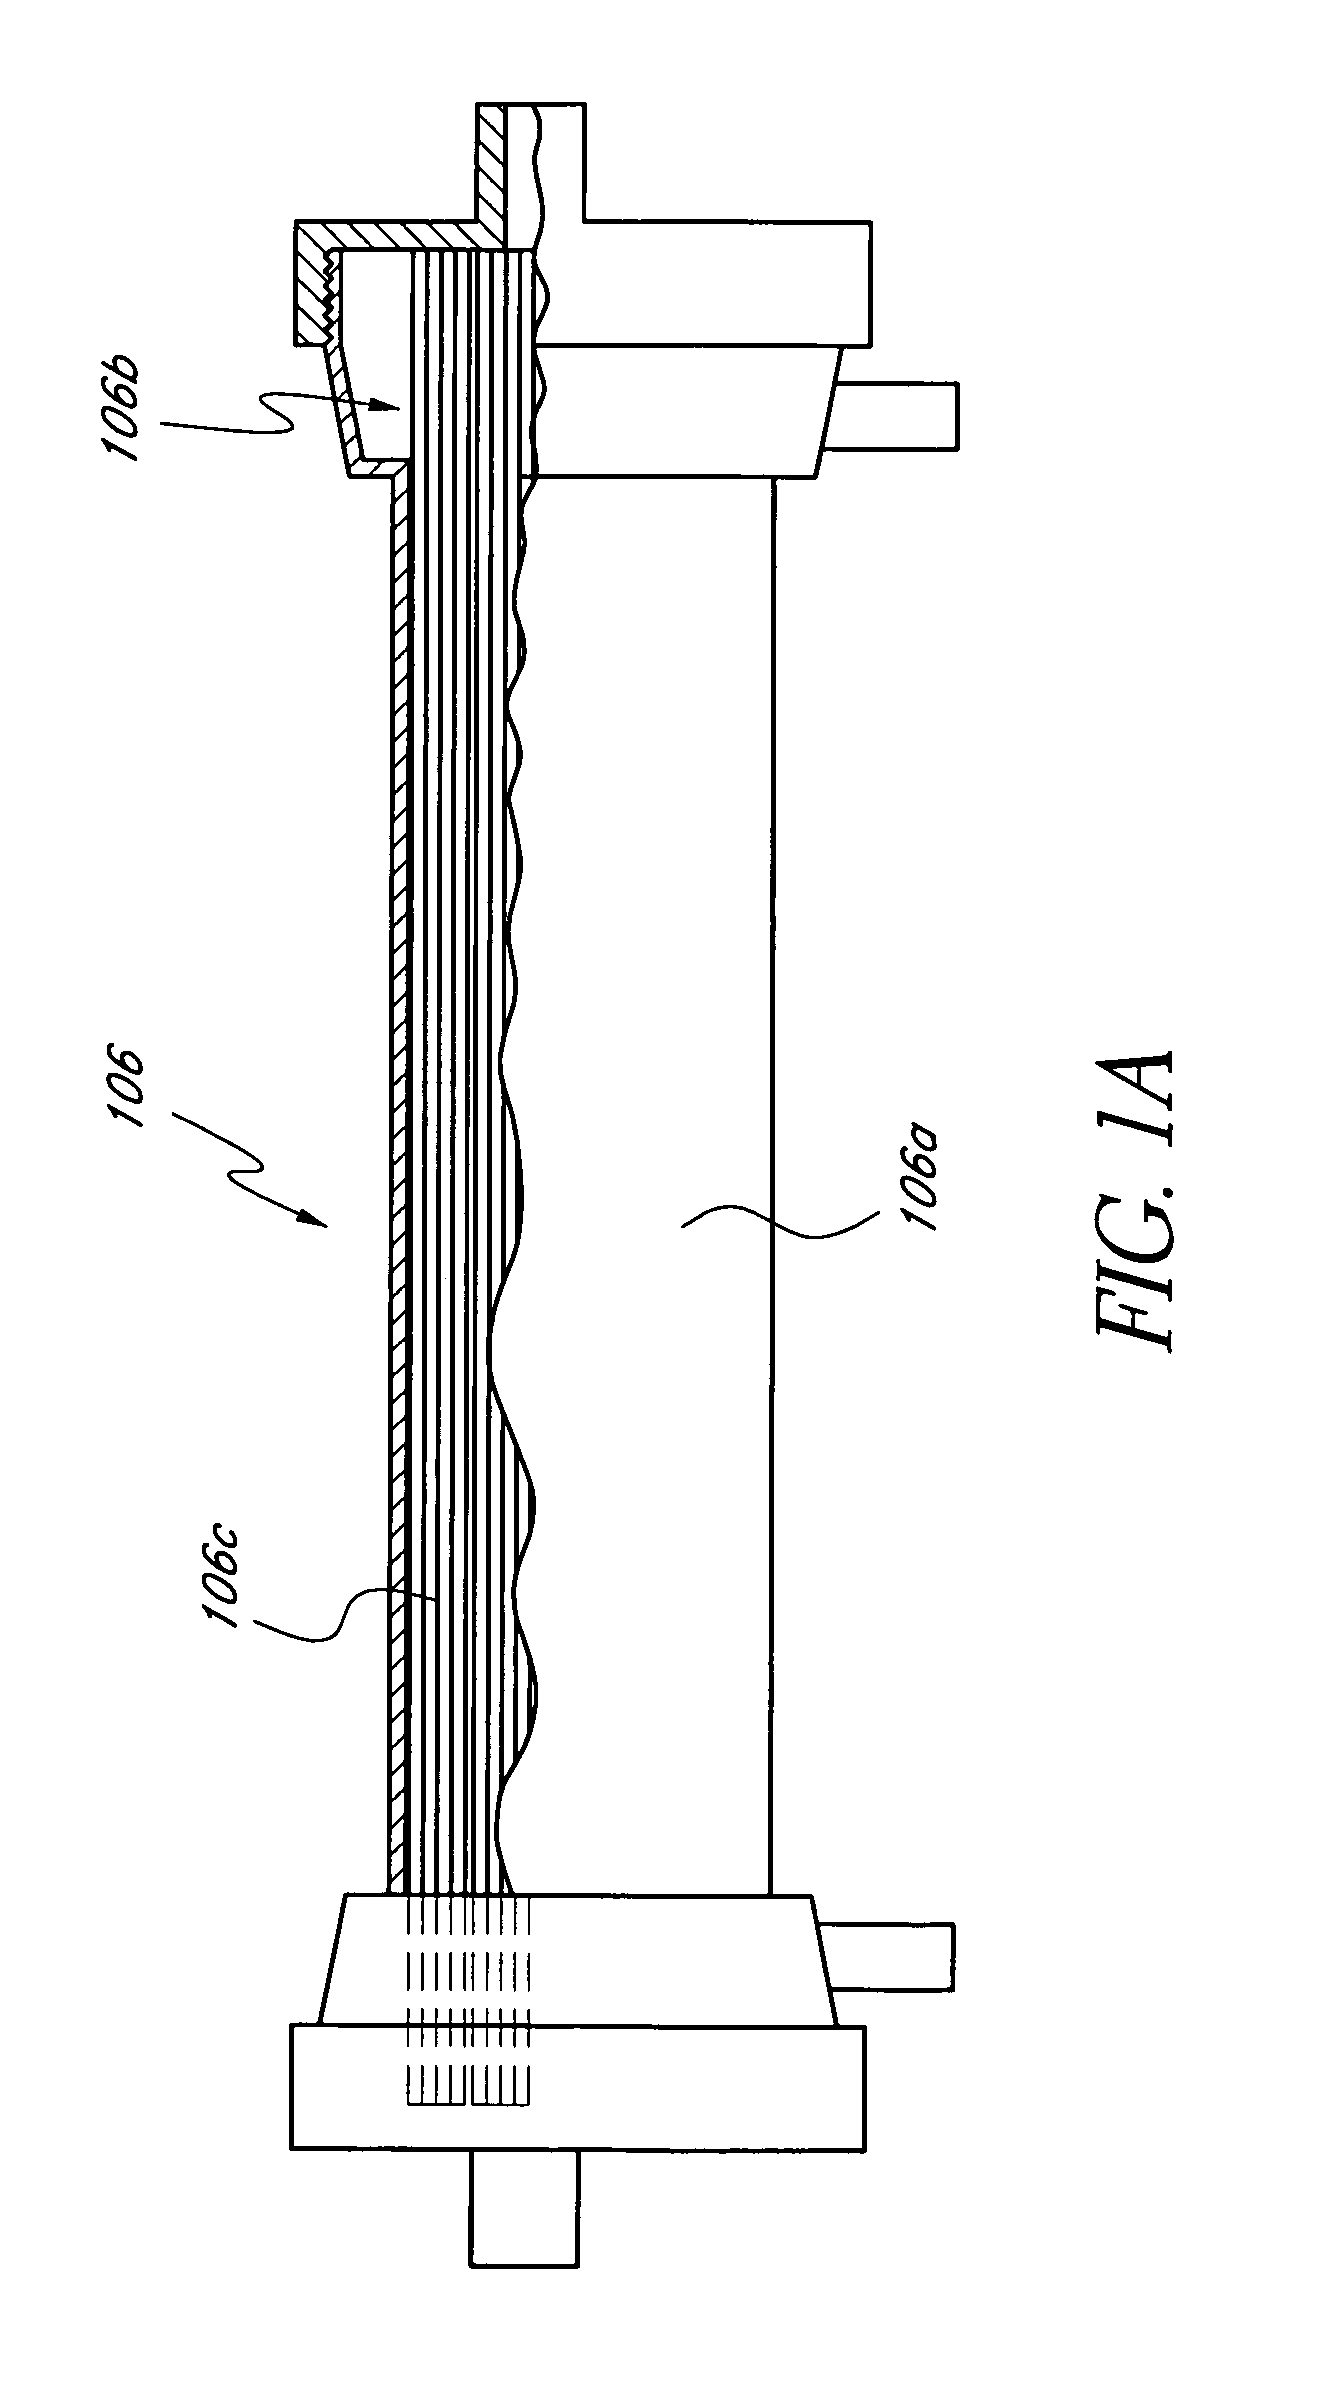 Device and method for reducing inflammatory mediators in blood